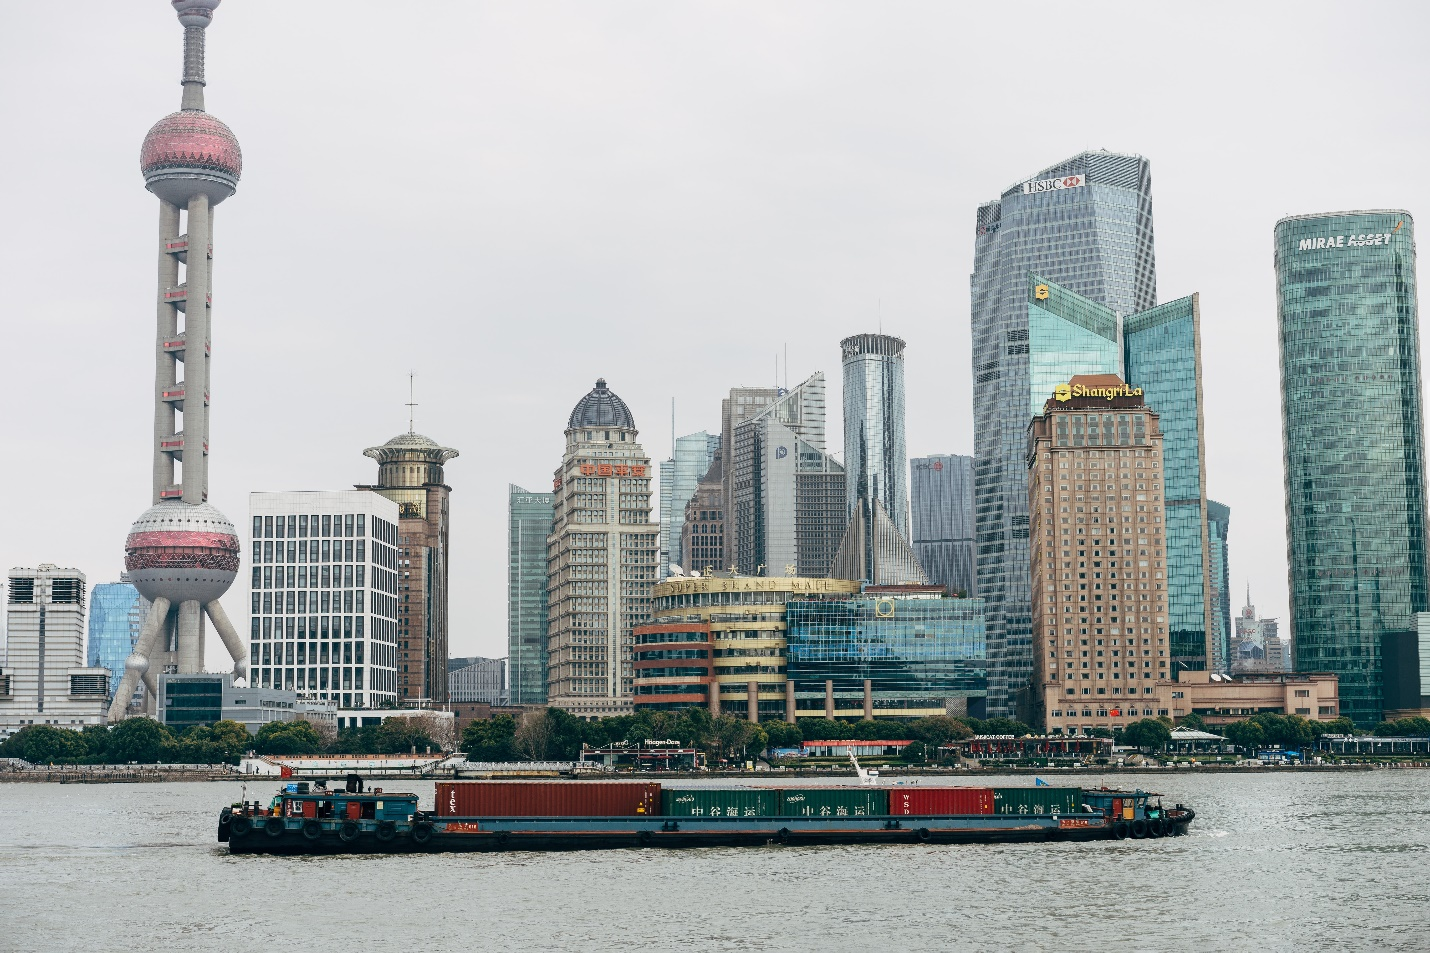 Photo of Shanghai buildings during daytime